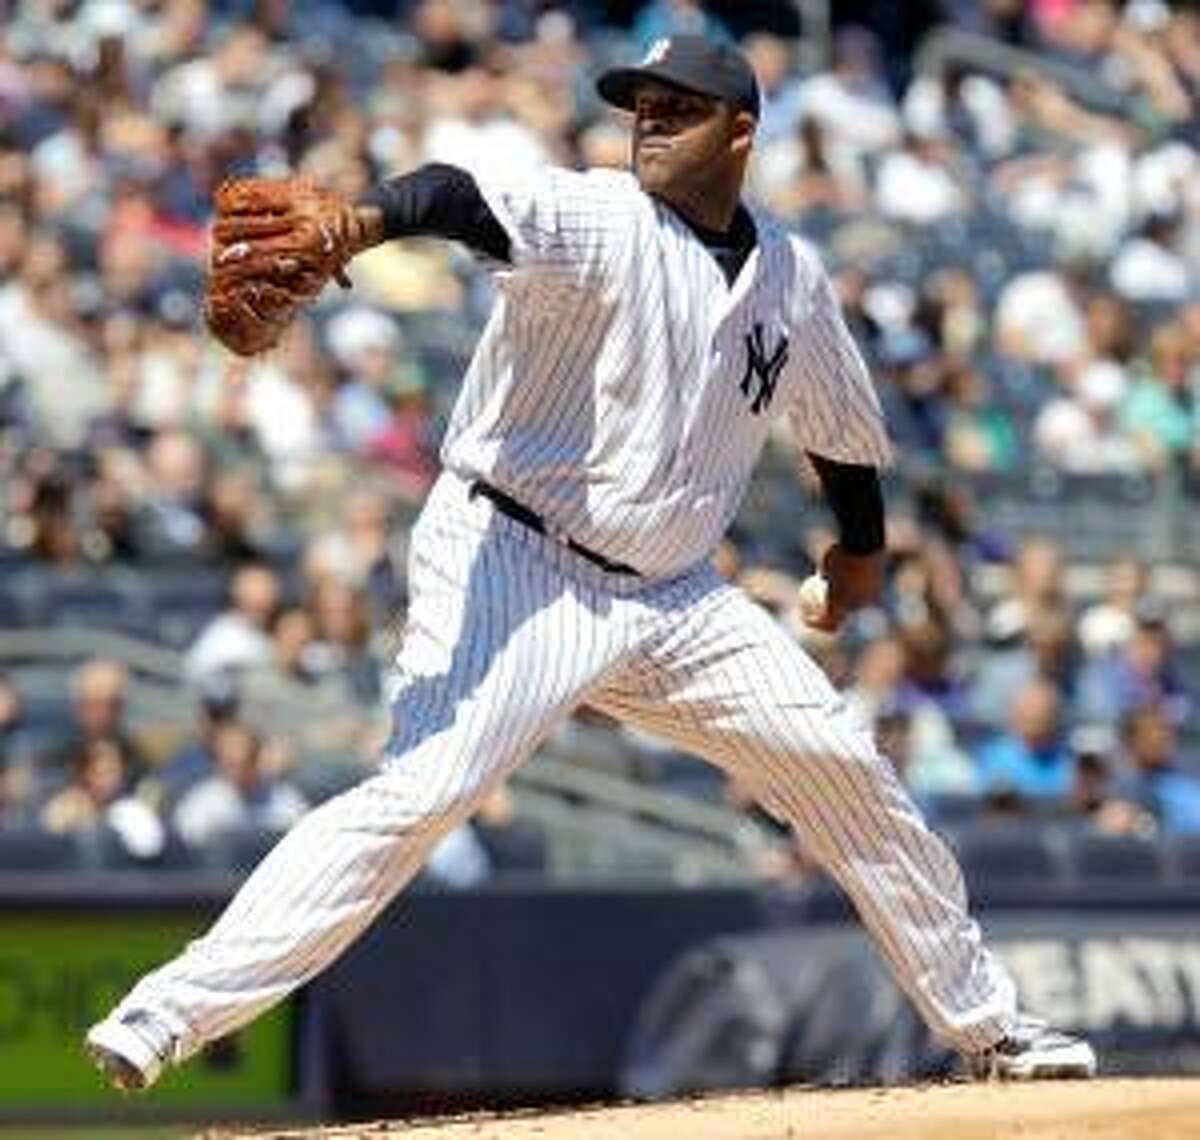 ASSOCIATED PRESS New York Yankees starting pitcher CC Sabathia winds up during the second inning of Sunday's game against the Detroit Tigers at Yankee Stadium in New York. The Yankees won the game 6-2.